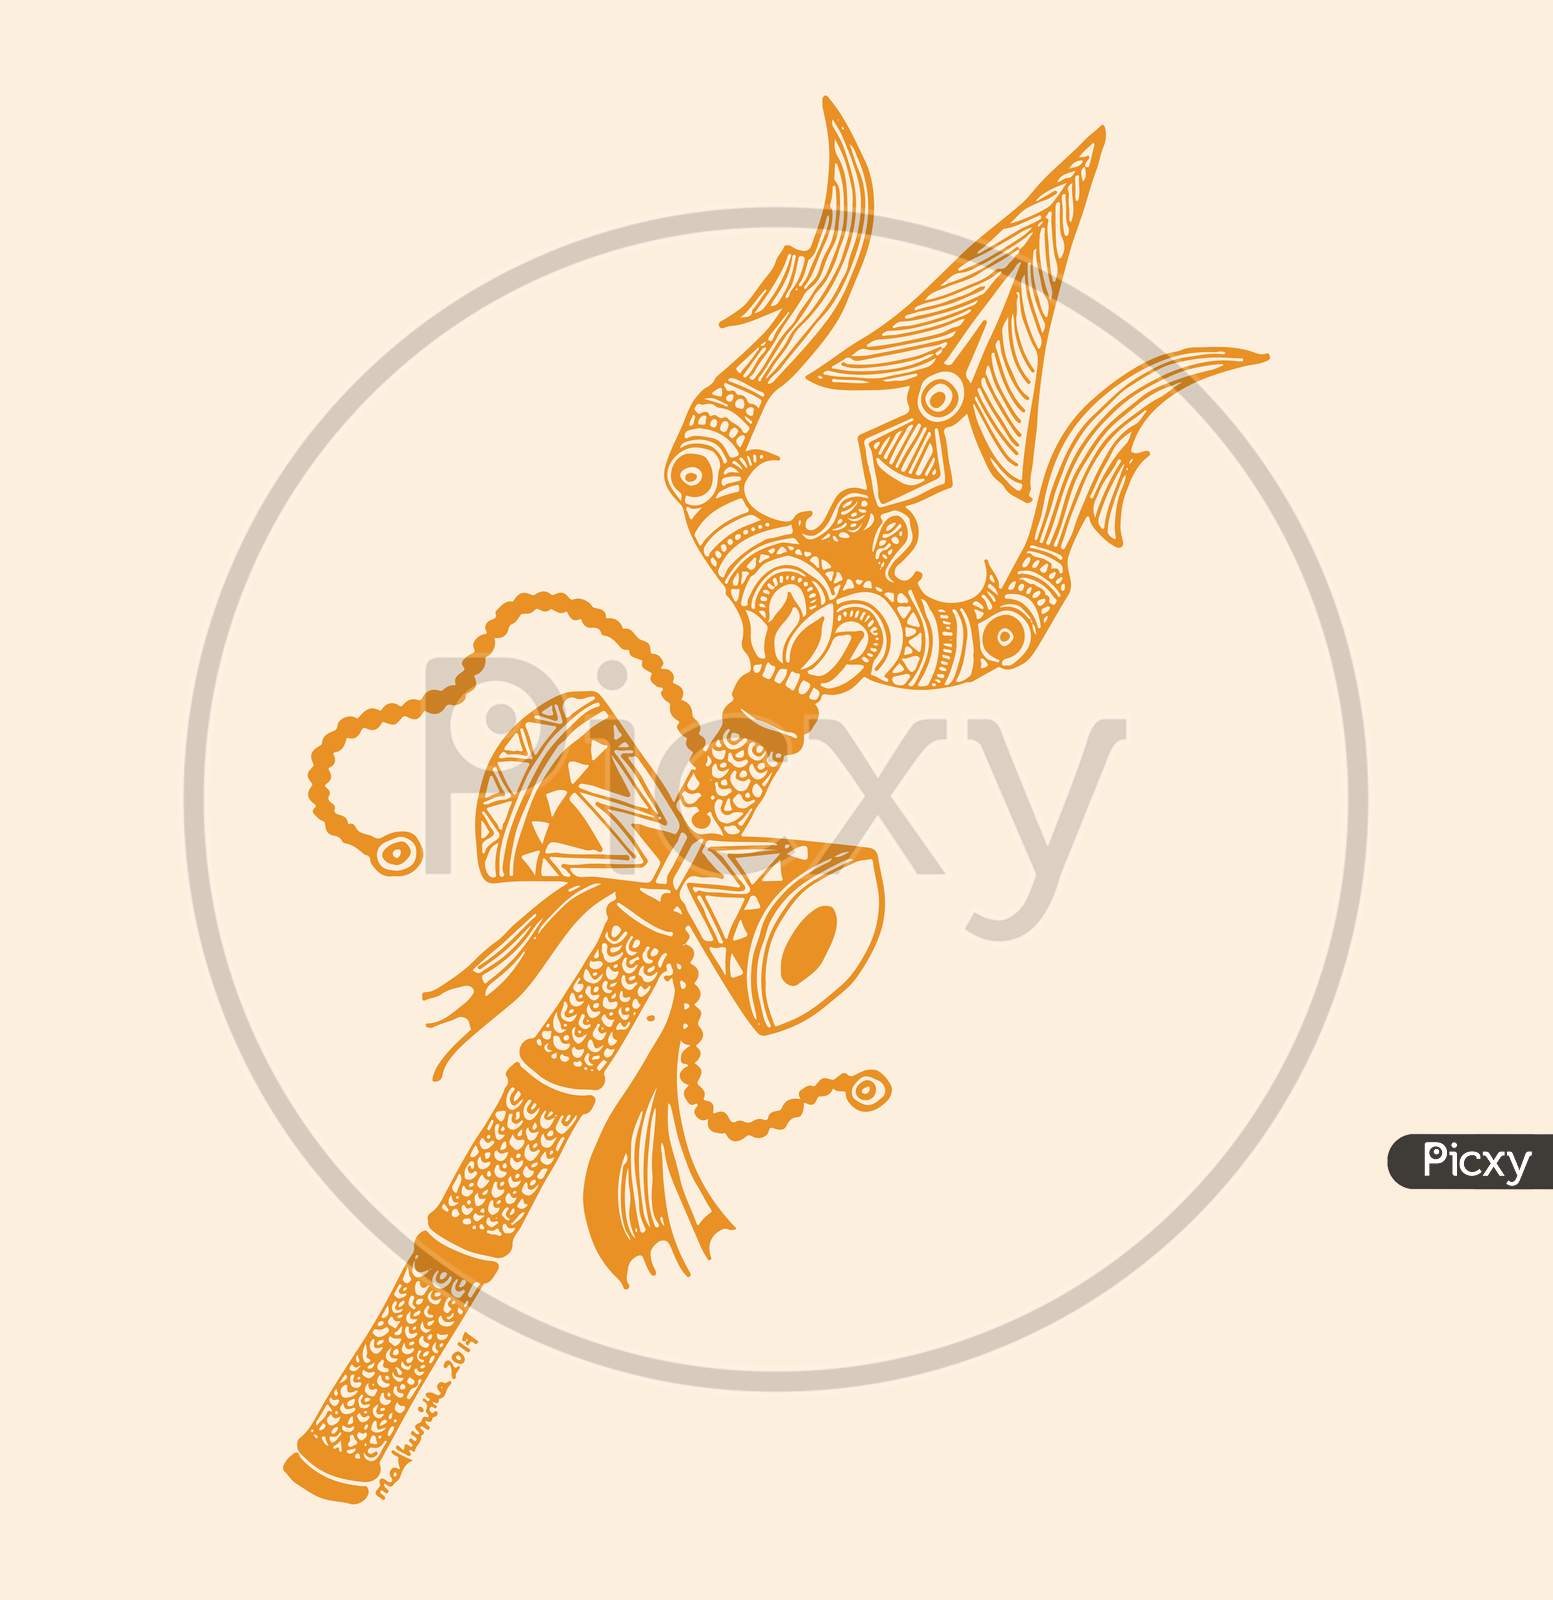 Image of Drawing Or Sketch Of Lord Shiva Outline Vector Illustration  Design Element Of Shiv Text Mahadev Trishul And Three TilakER769120Picxy